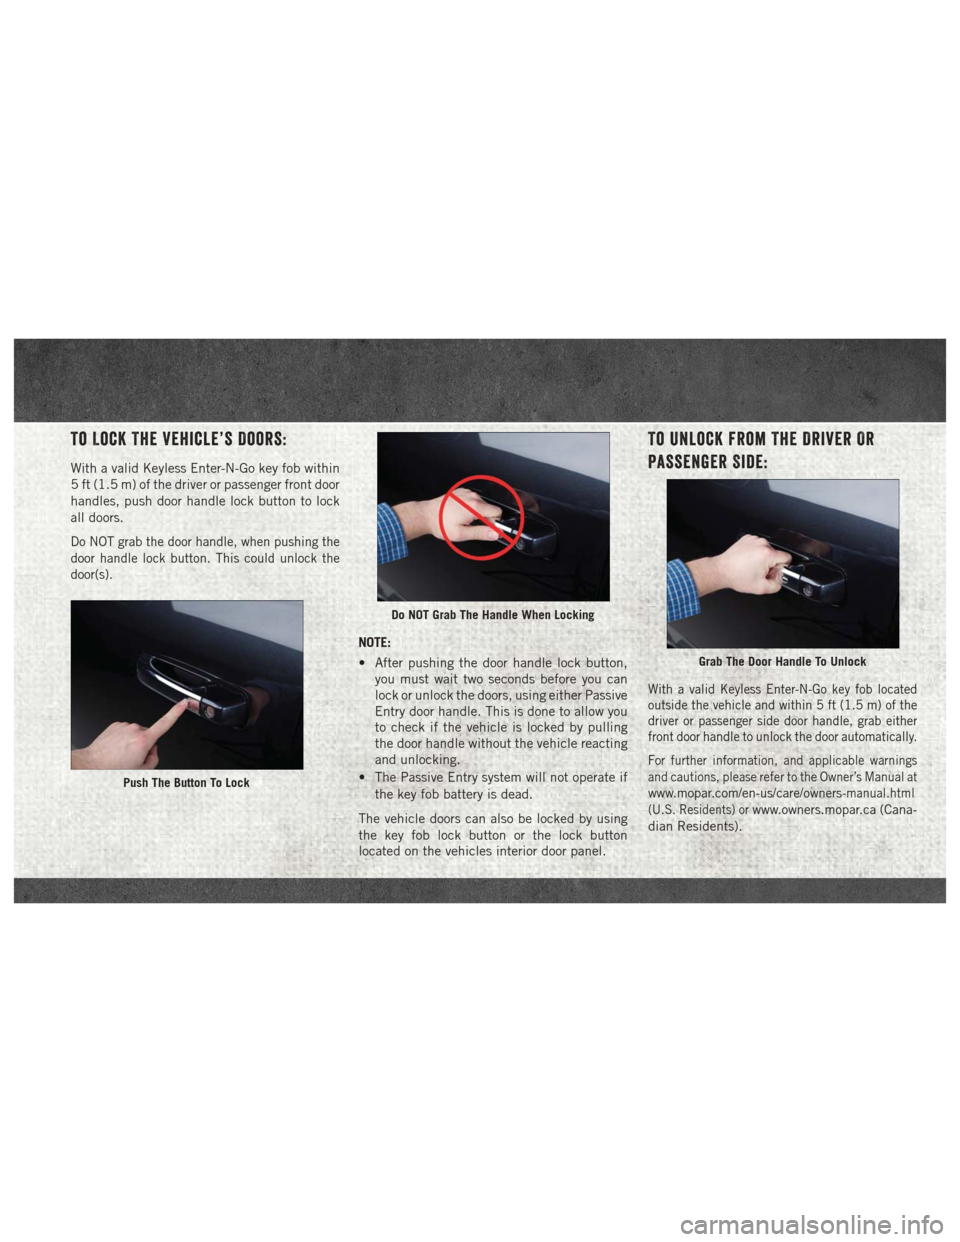 Ram 1500 2018  Quick Reference Guide To Lock The Vehicle’s Doors:
With a valid Keyless Enter-N-Go key fob within
5 ft (1.5 m) of the driver or passenger front door
handles, push door handle lock button to lock
all doors.
Do NOT grab th